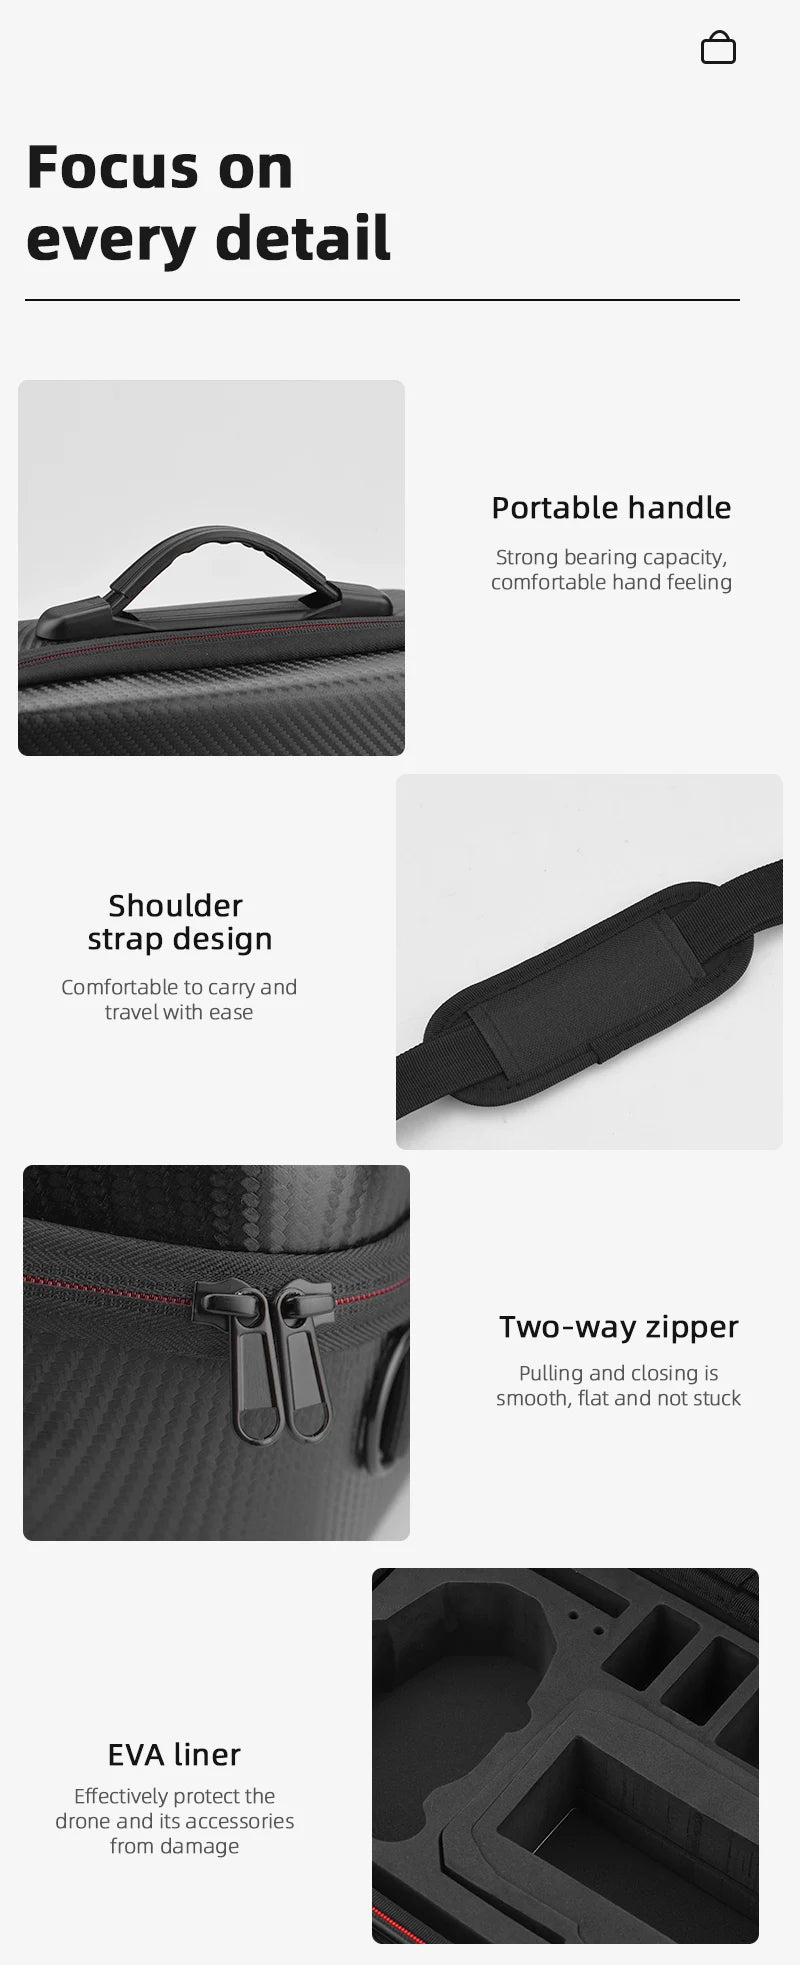 Storage Bag for DJI MINI 3 PRO, focus on every detail Portable handle Strong bearing capacity, comfortable hand feeling Shoulder strap design Comfortable